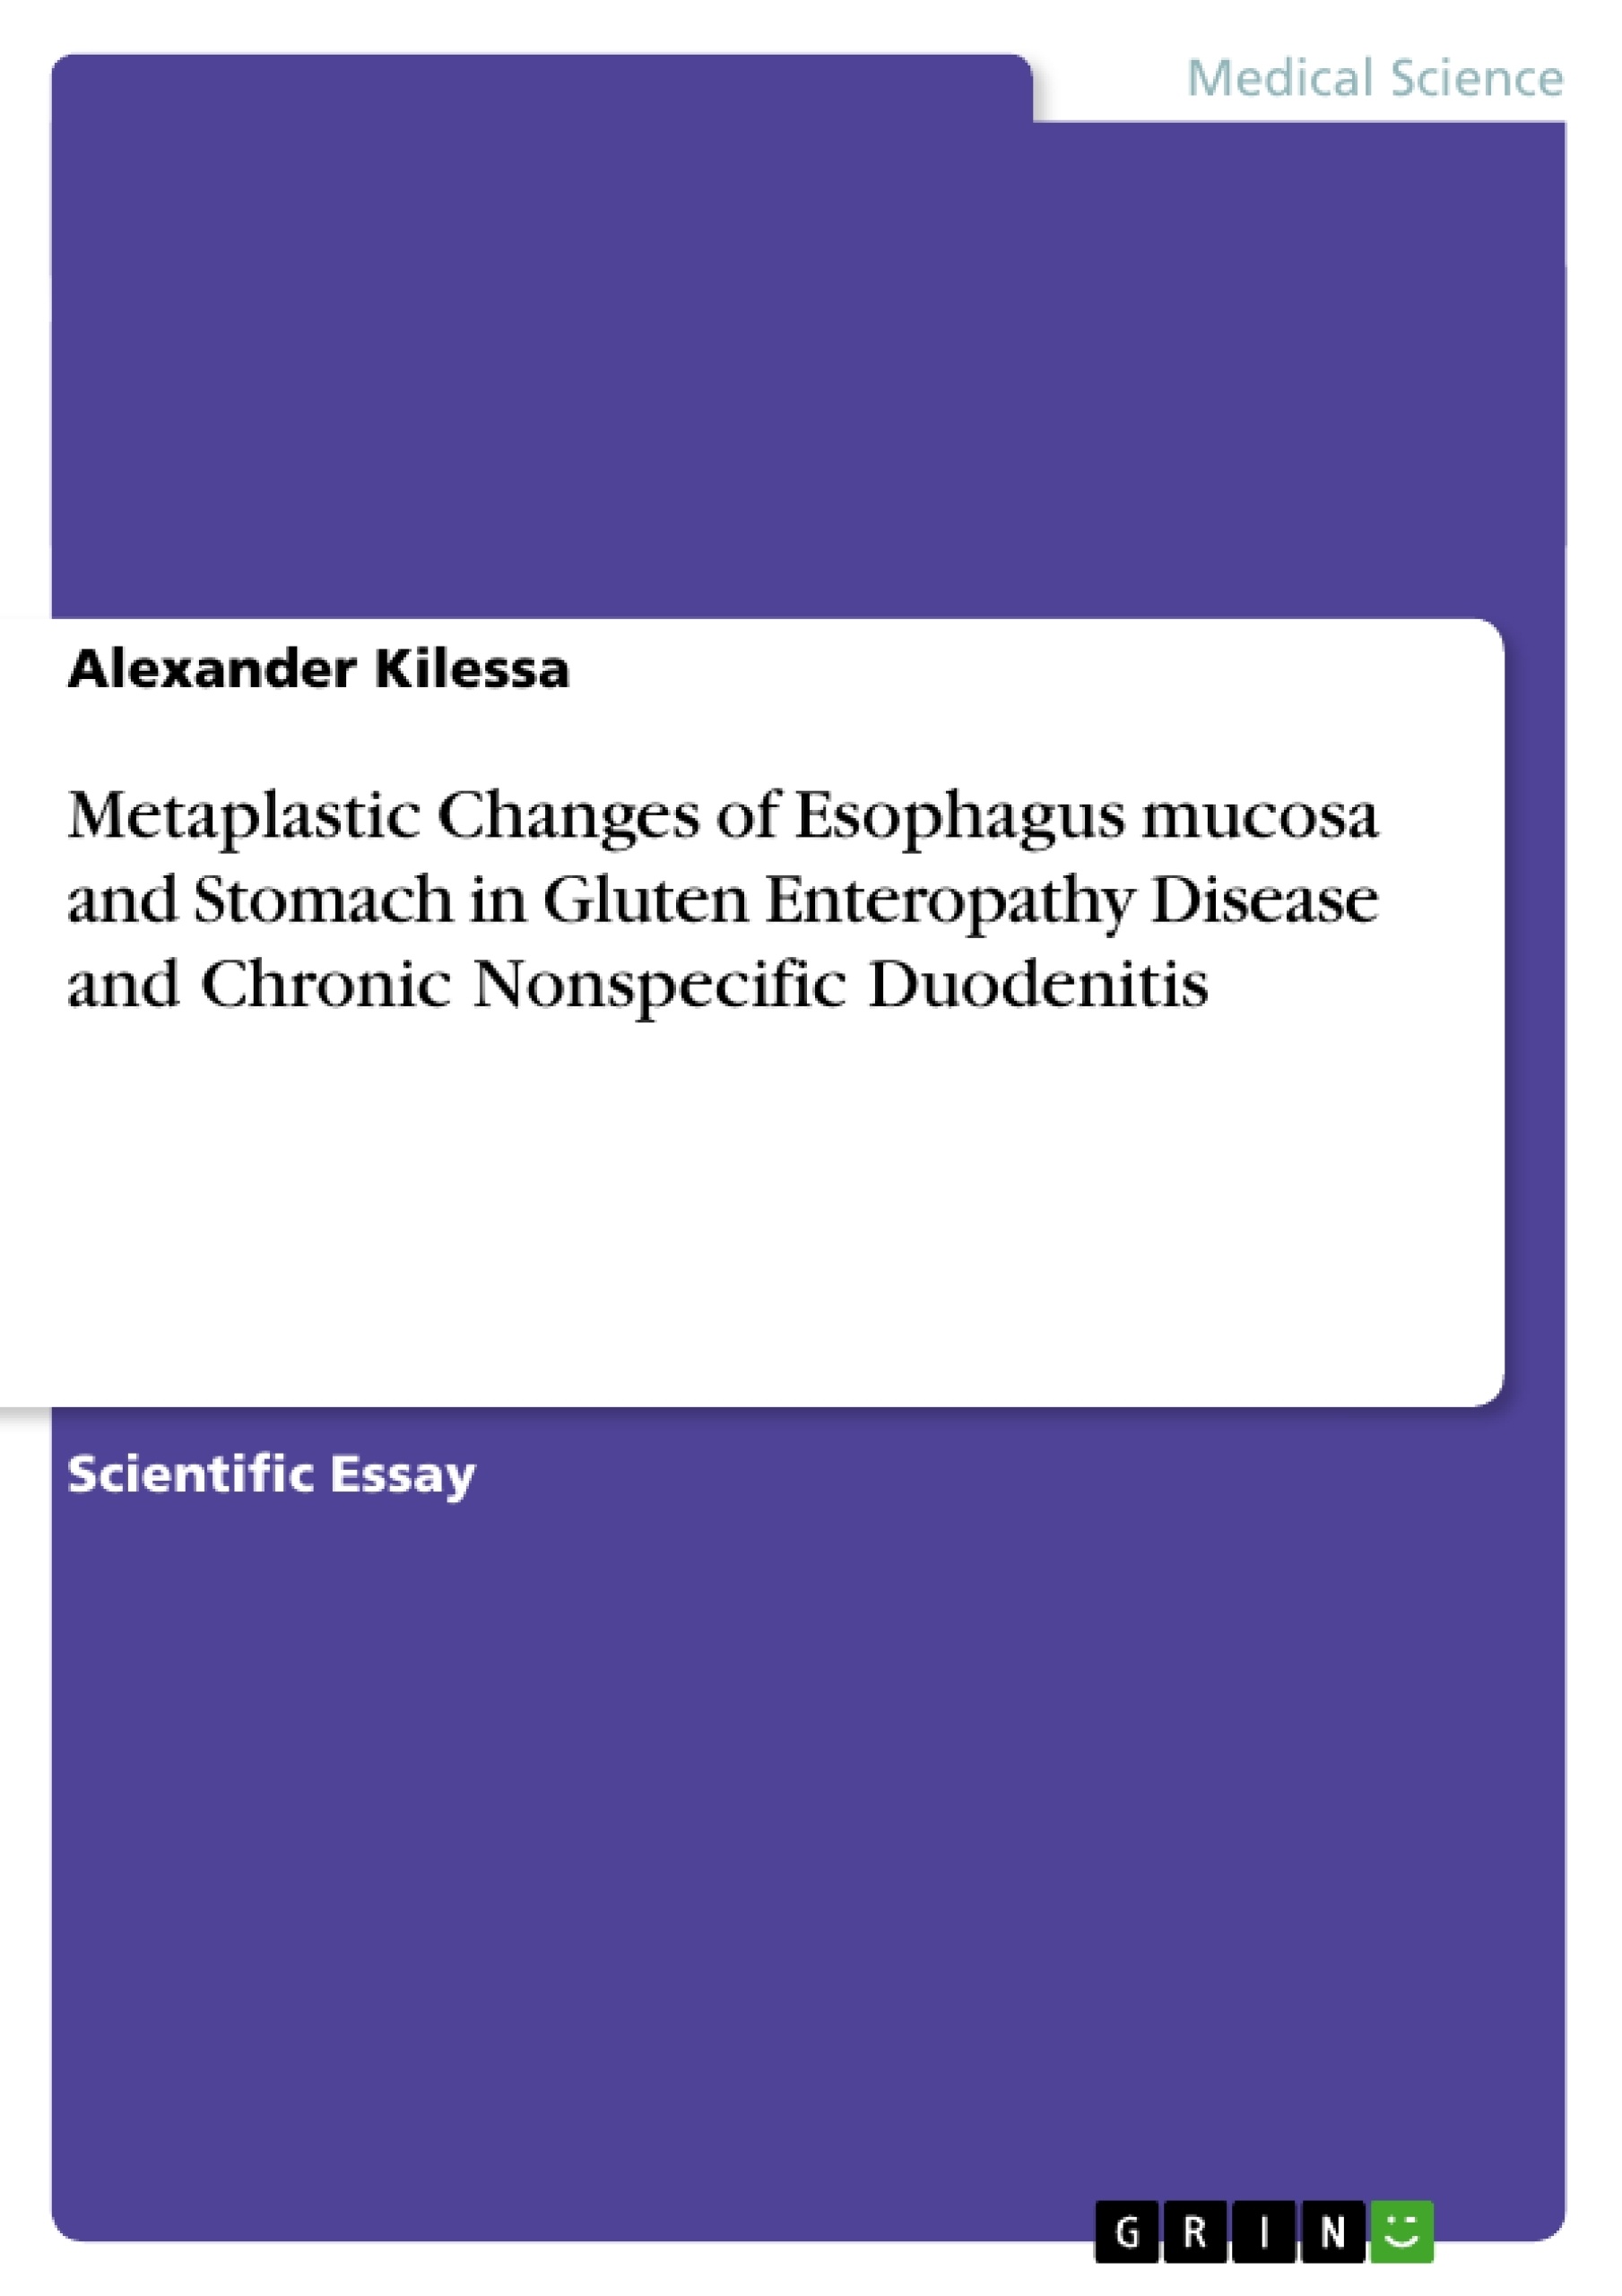 Title: Metaplastic Changes of Esophagus mucosa and Stomach in Gluten Enteropathy Disease and Chronic Nonspecific Duodenitis